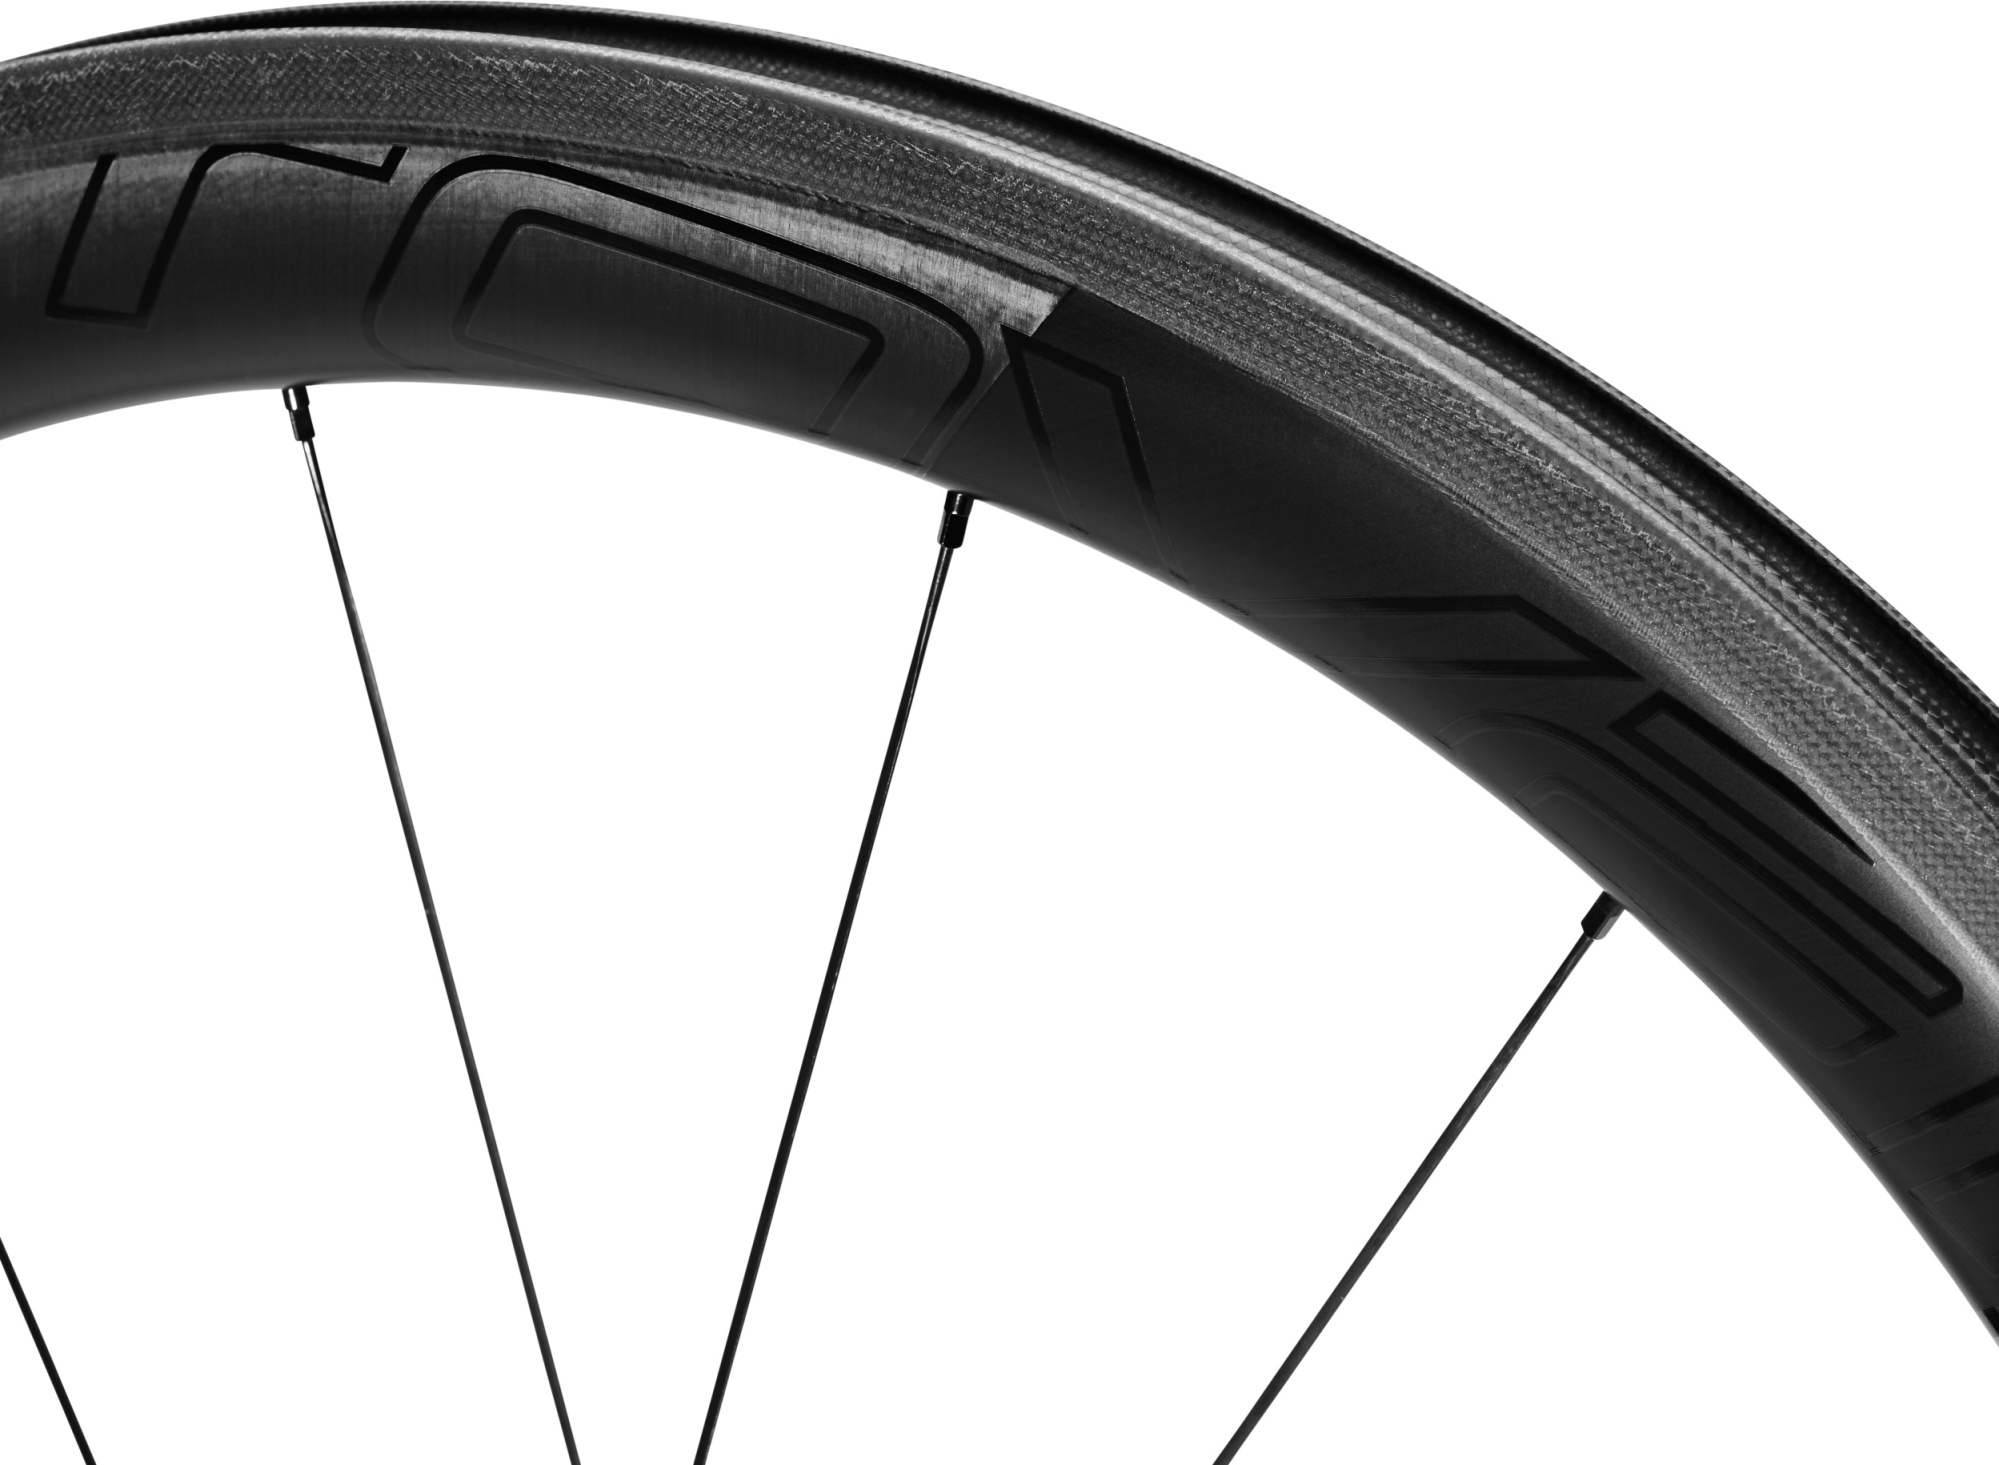 Roval CLX 50 wheels launched: Aero, tubeless, disc brakes and 